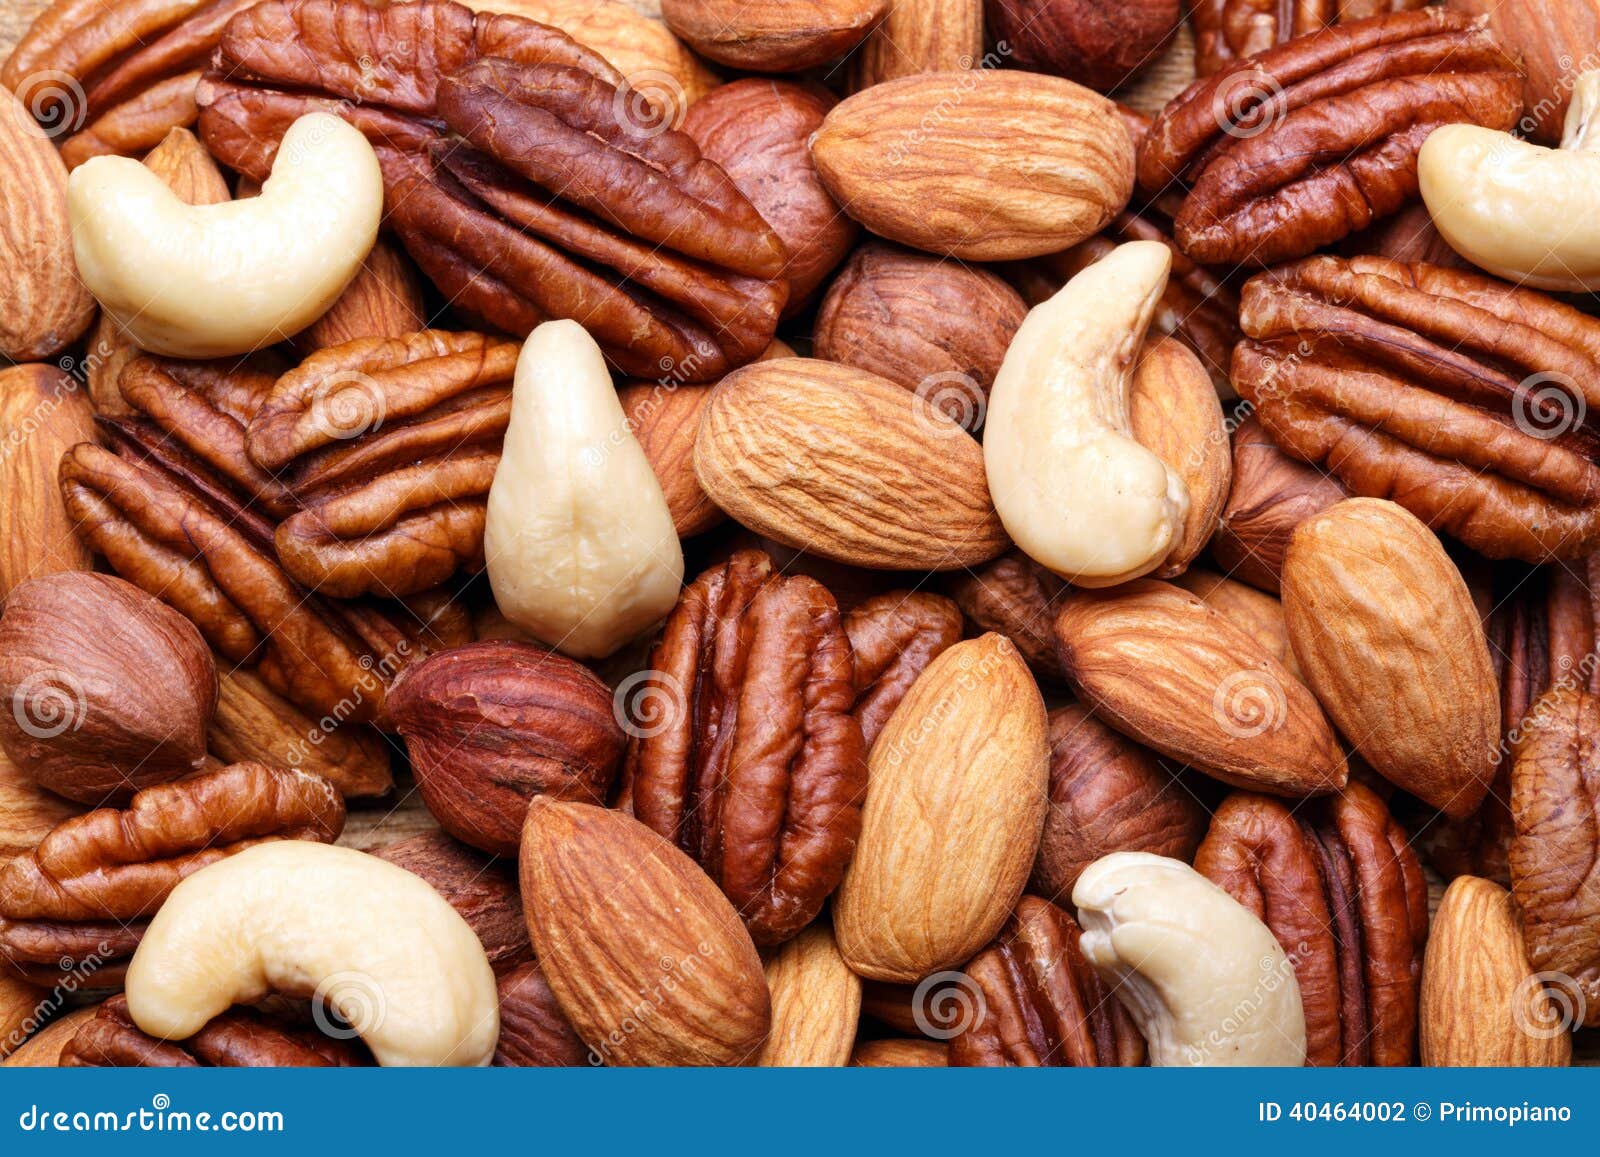 background texture of assorted mixed nuts including cashew, peca